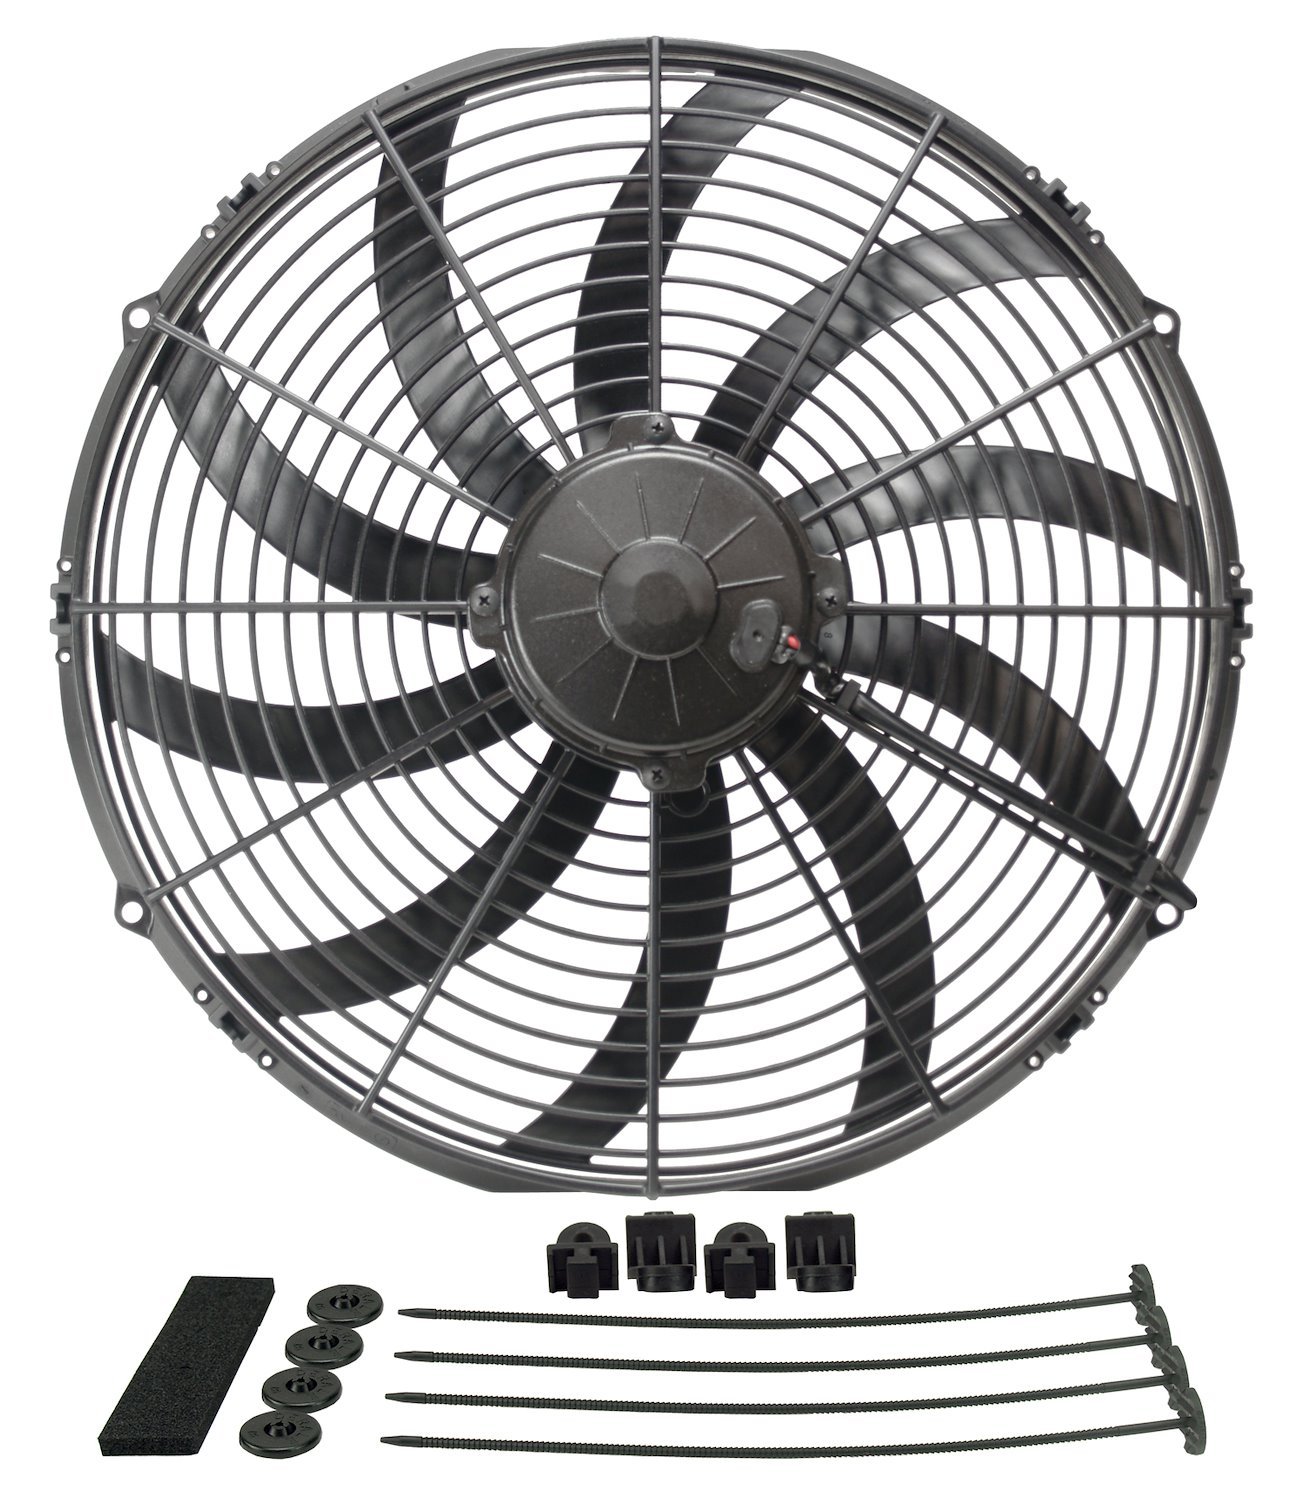 16" High-Output Extreme Ultra-Low Profile Waterproof/Dustproof Puller-Style Electric Fan 2024 CFM